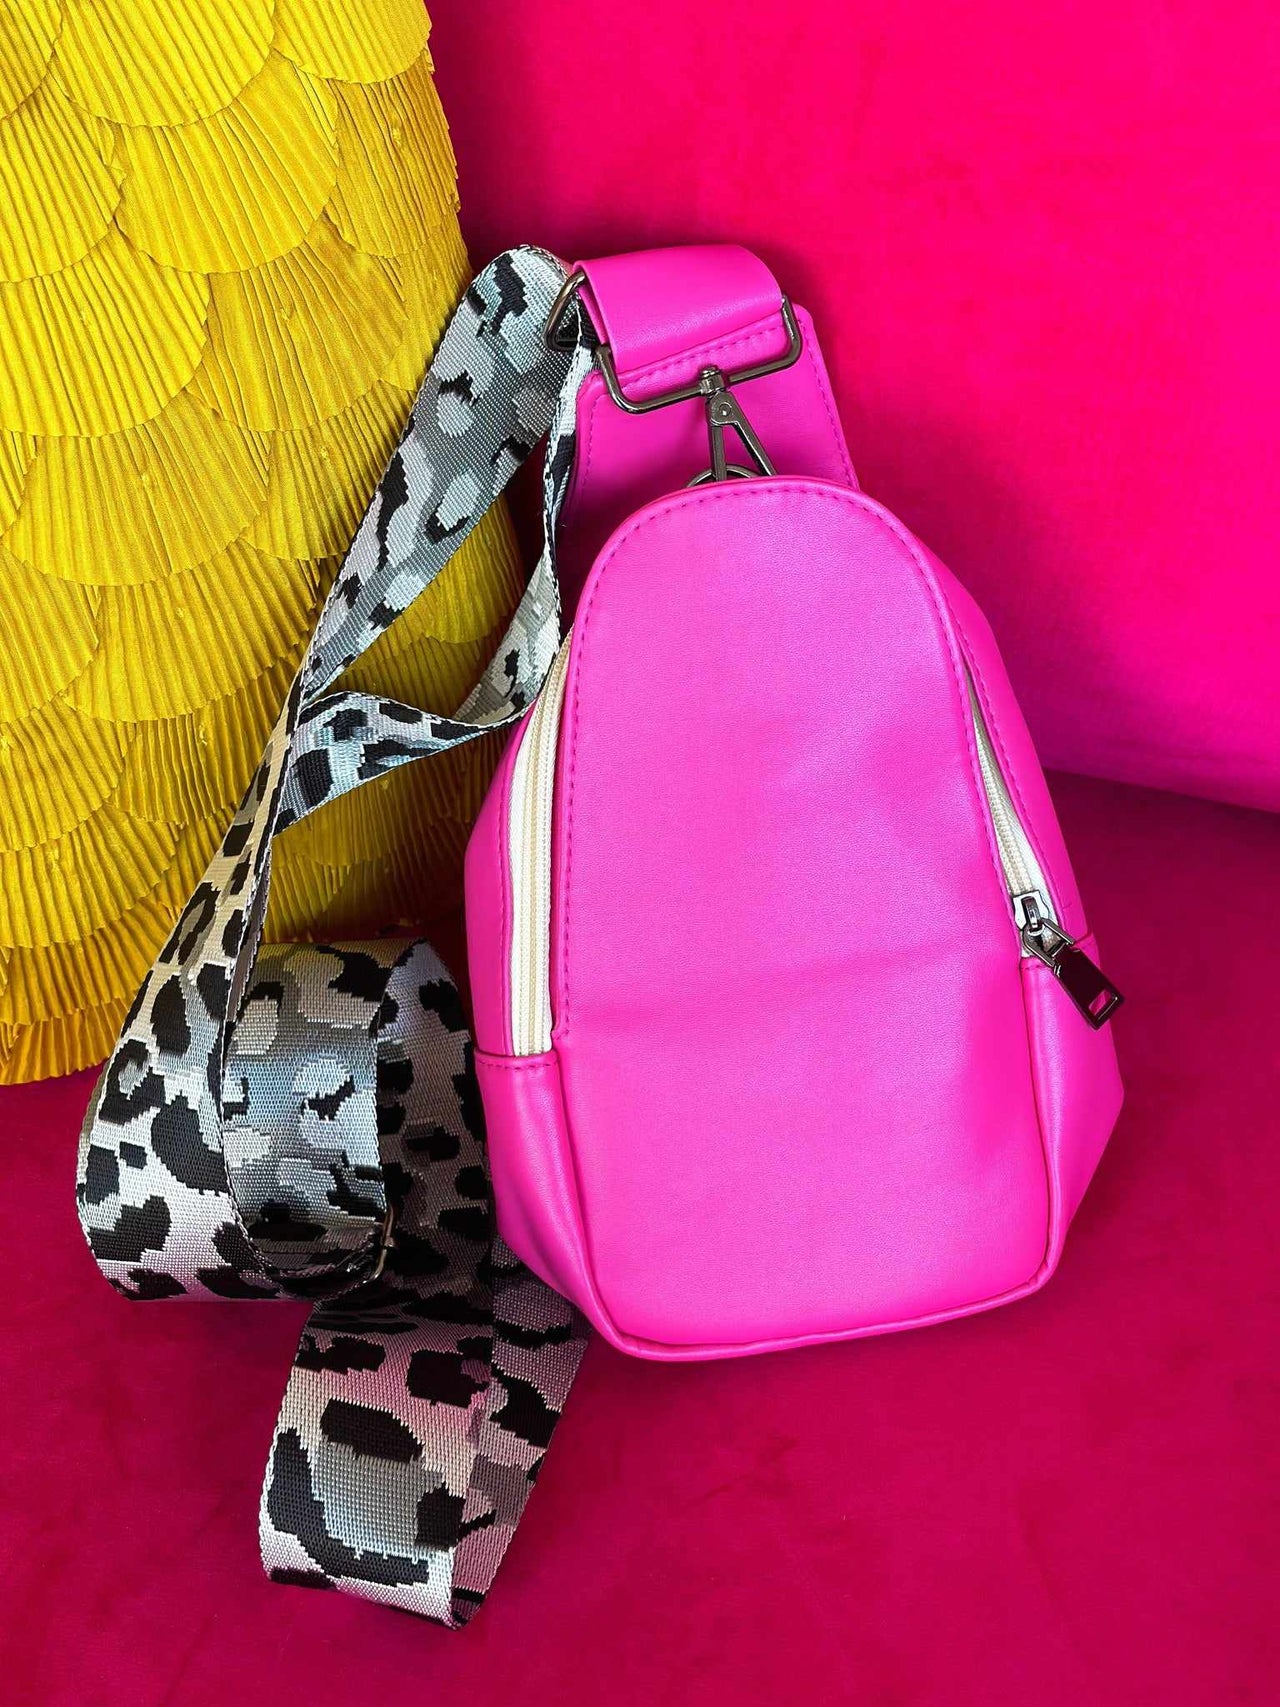 PREMIUM On The Go Hot Pink With Grey Strap Sling Bag